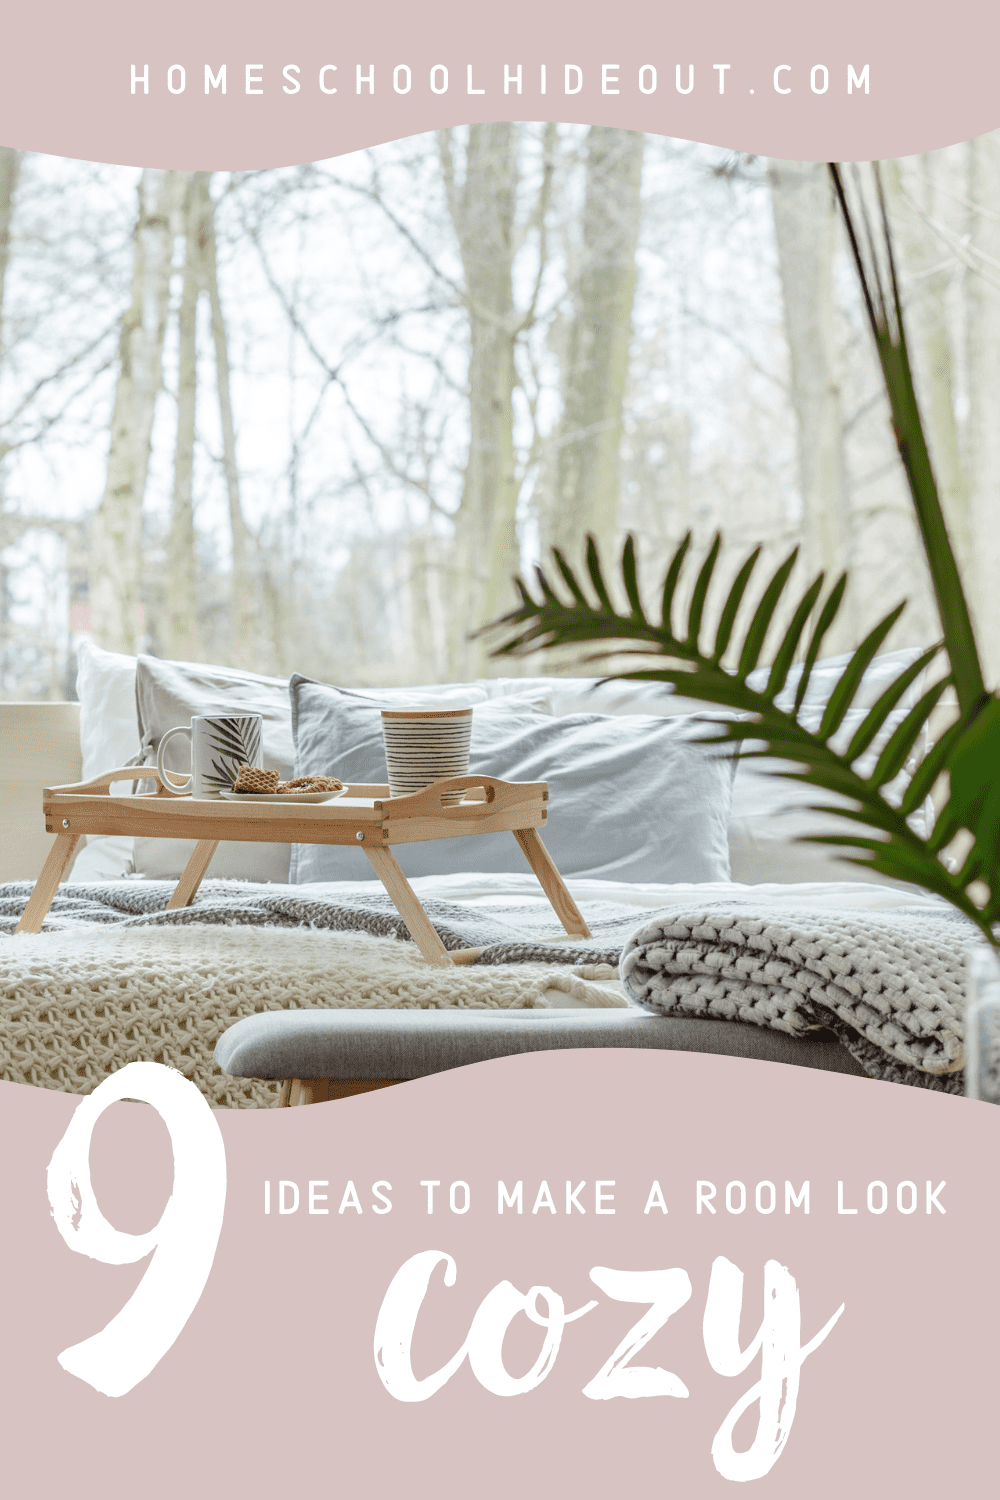 Wondering how to make rooms look cozy without breaking the bank? These tips are AWESOME! I love #2!